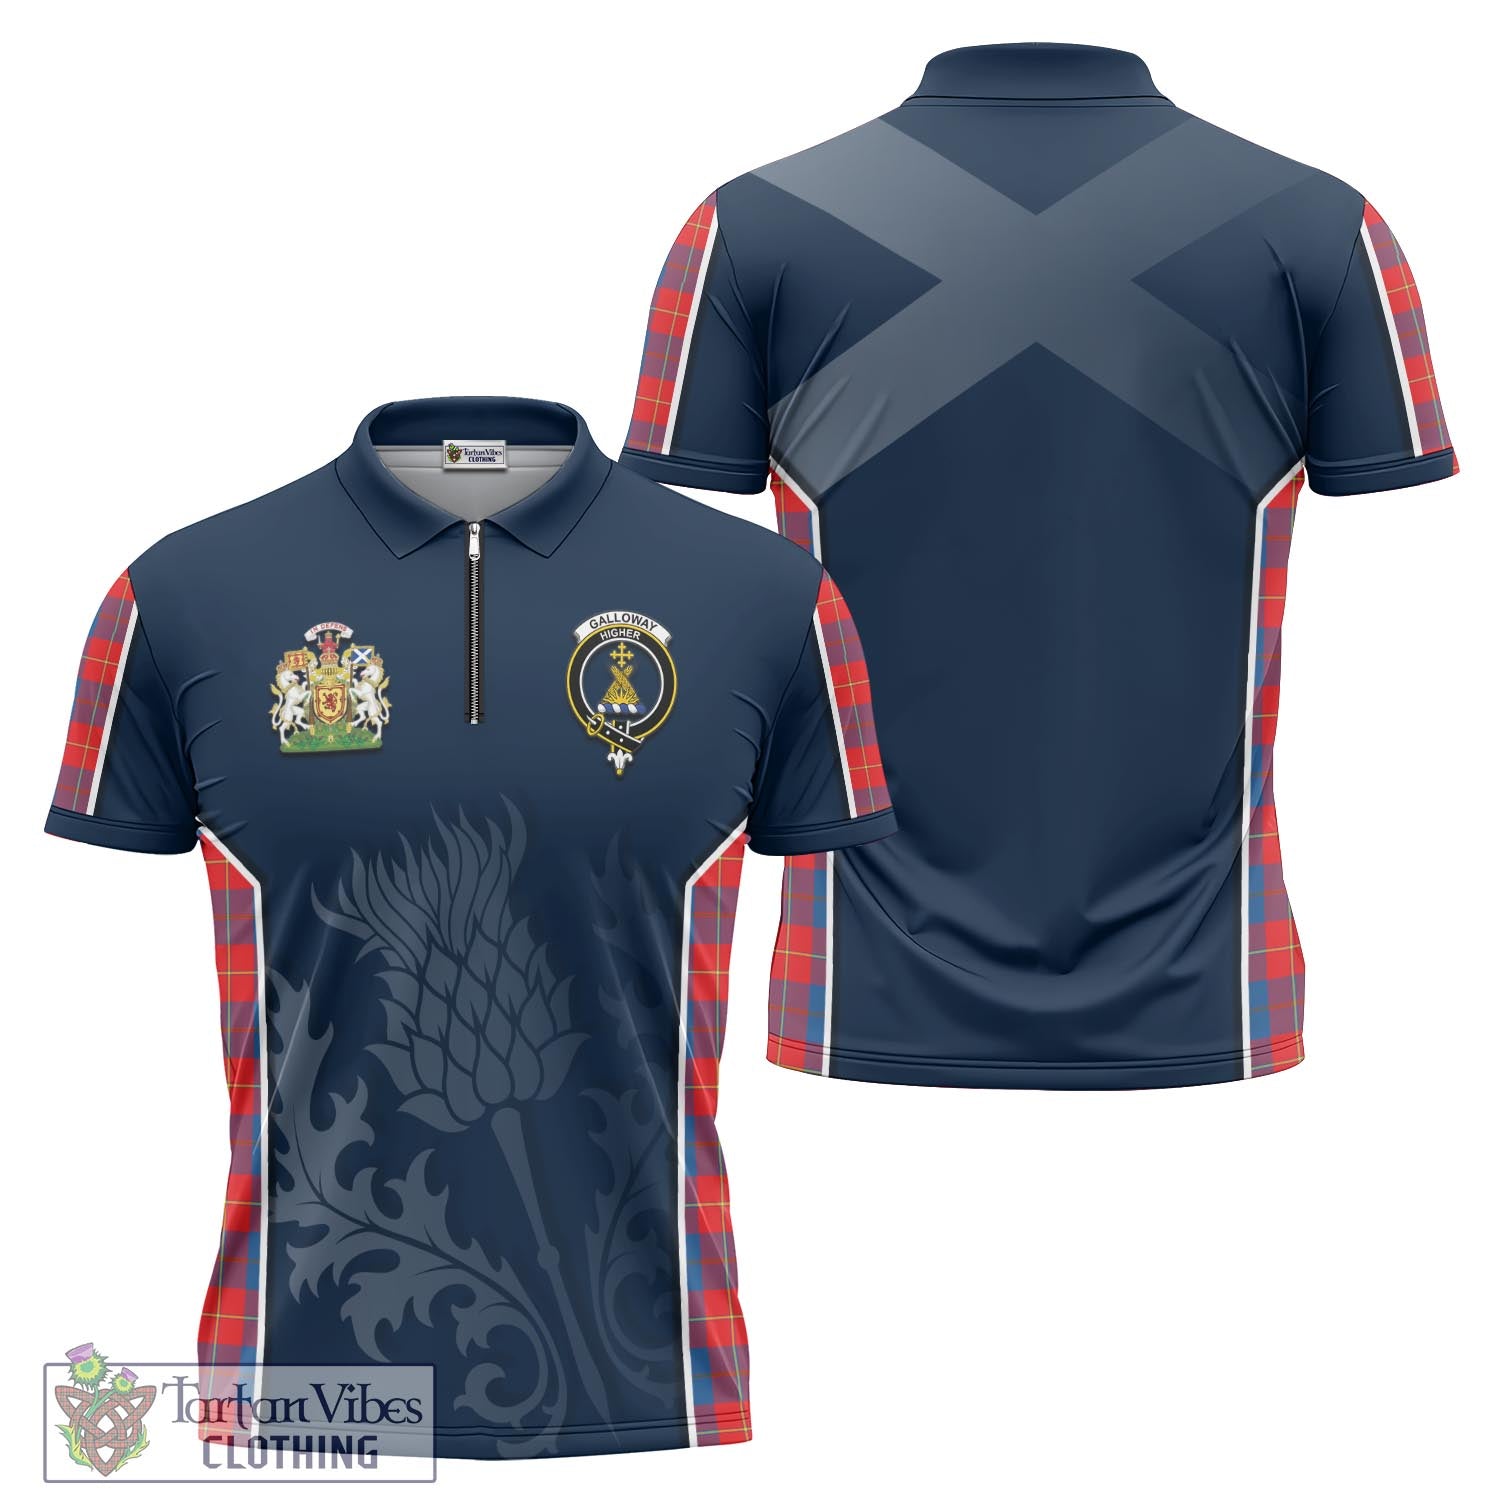 Tartan Vibes Clothing Galloway Red Tartan Zipper Polo Shirt with Family Crest and Scottish Thistle Vibes Sport Style